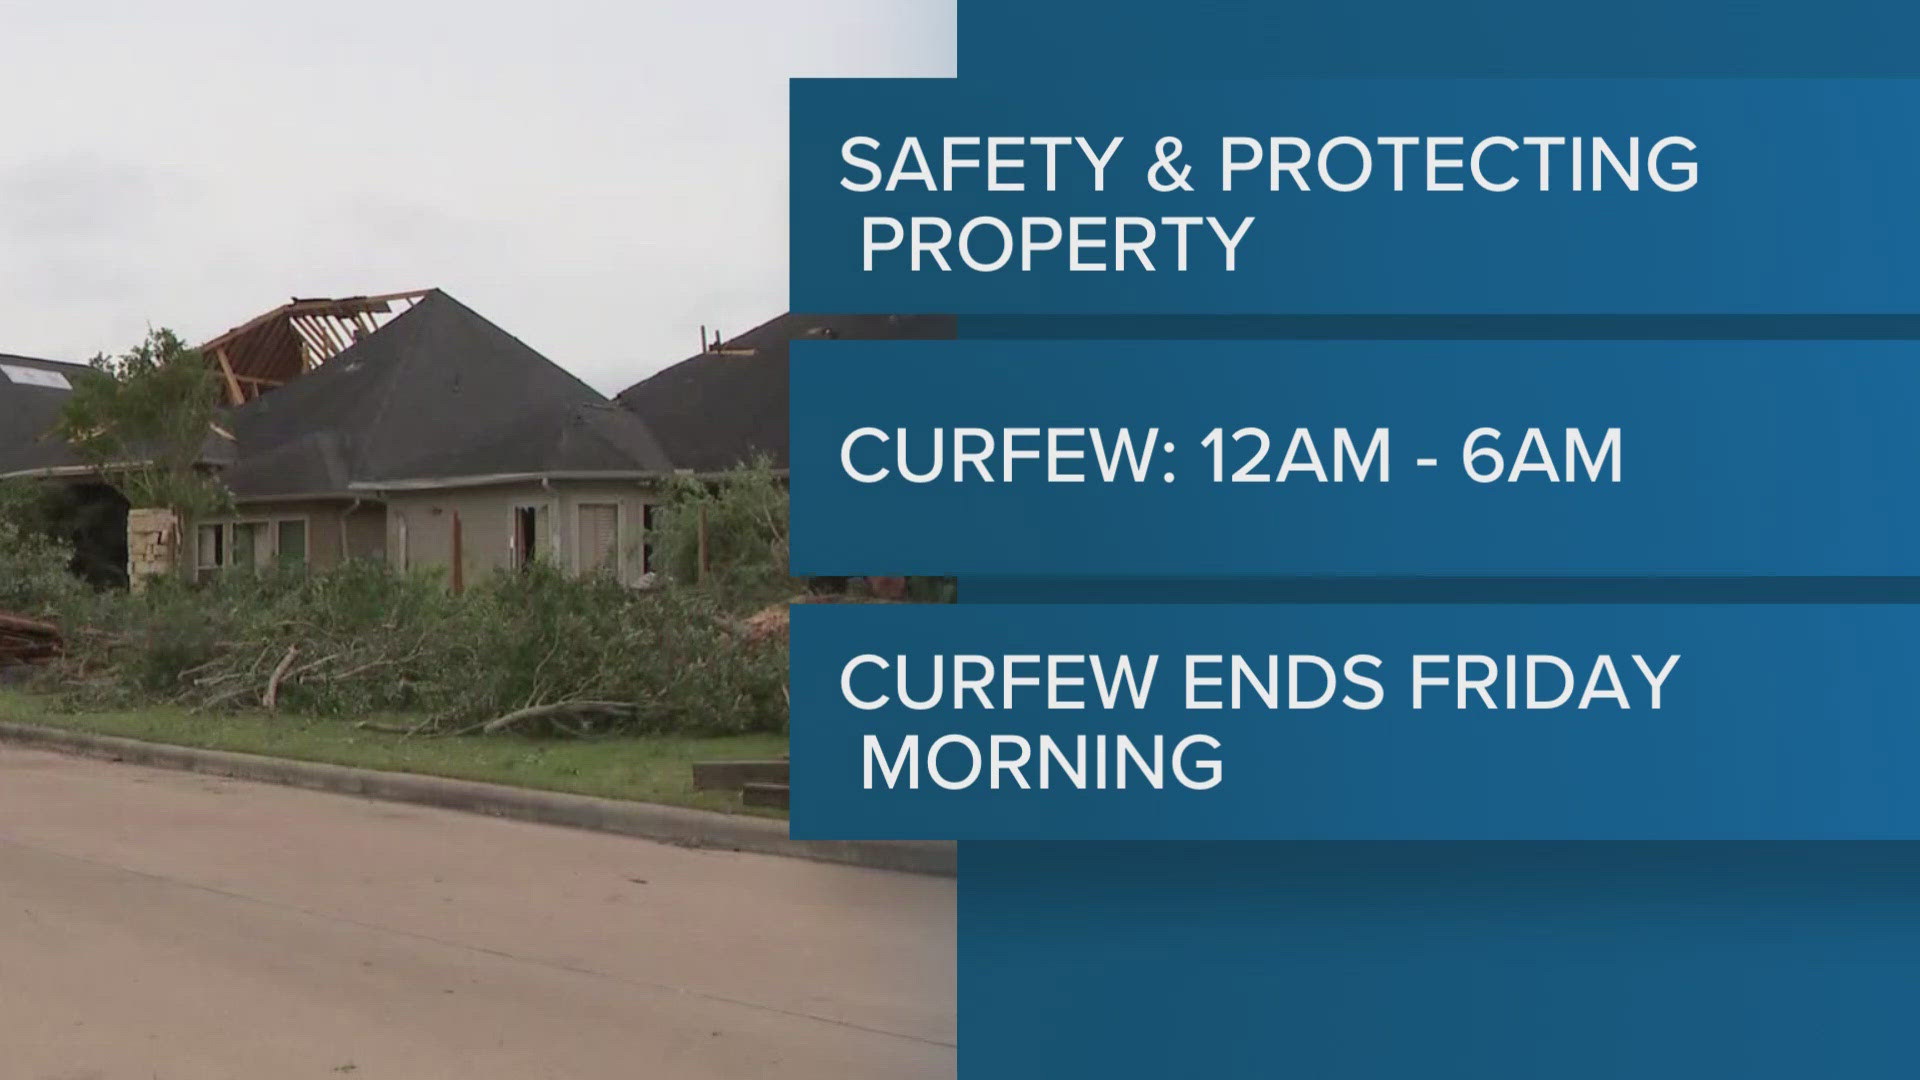 The curfew goes from midnight until 6 a.m. through Friday. It's designed to protect property from theft.